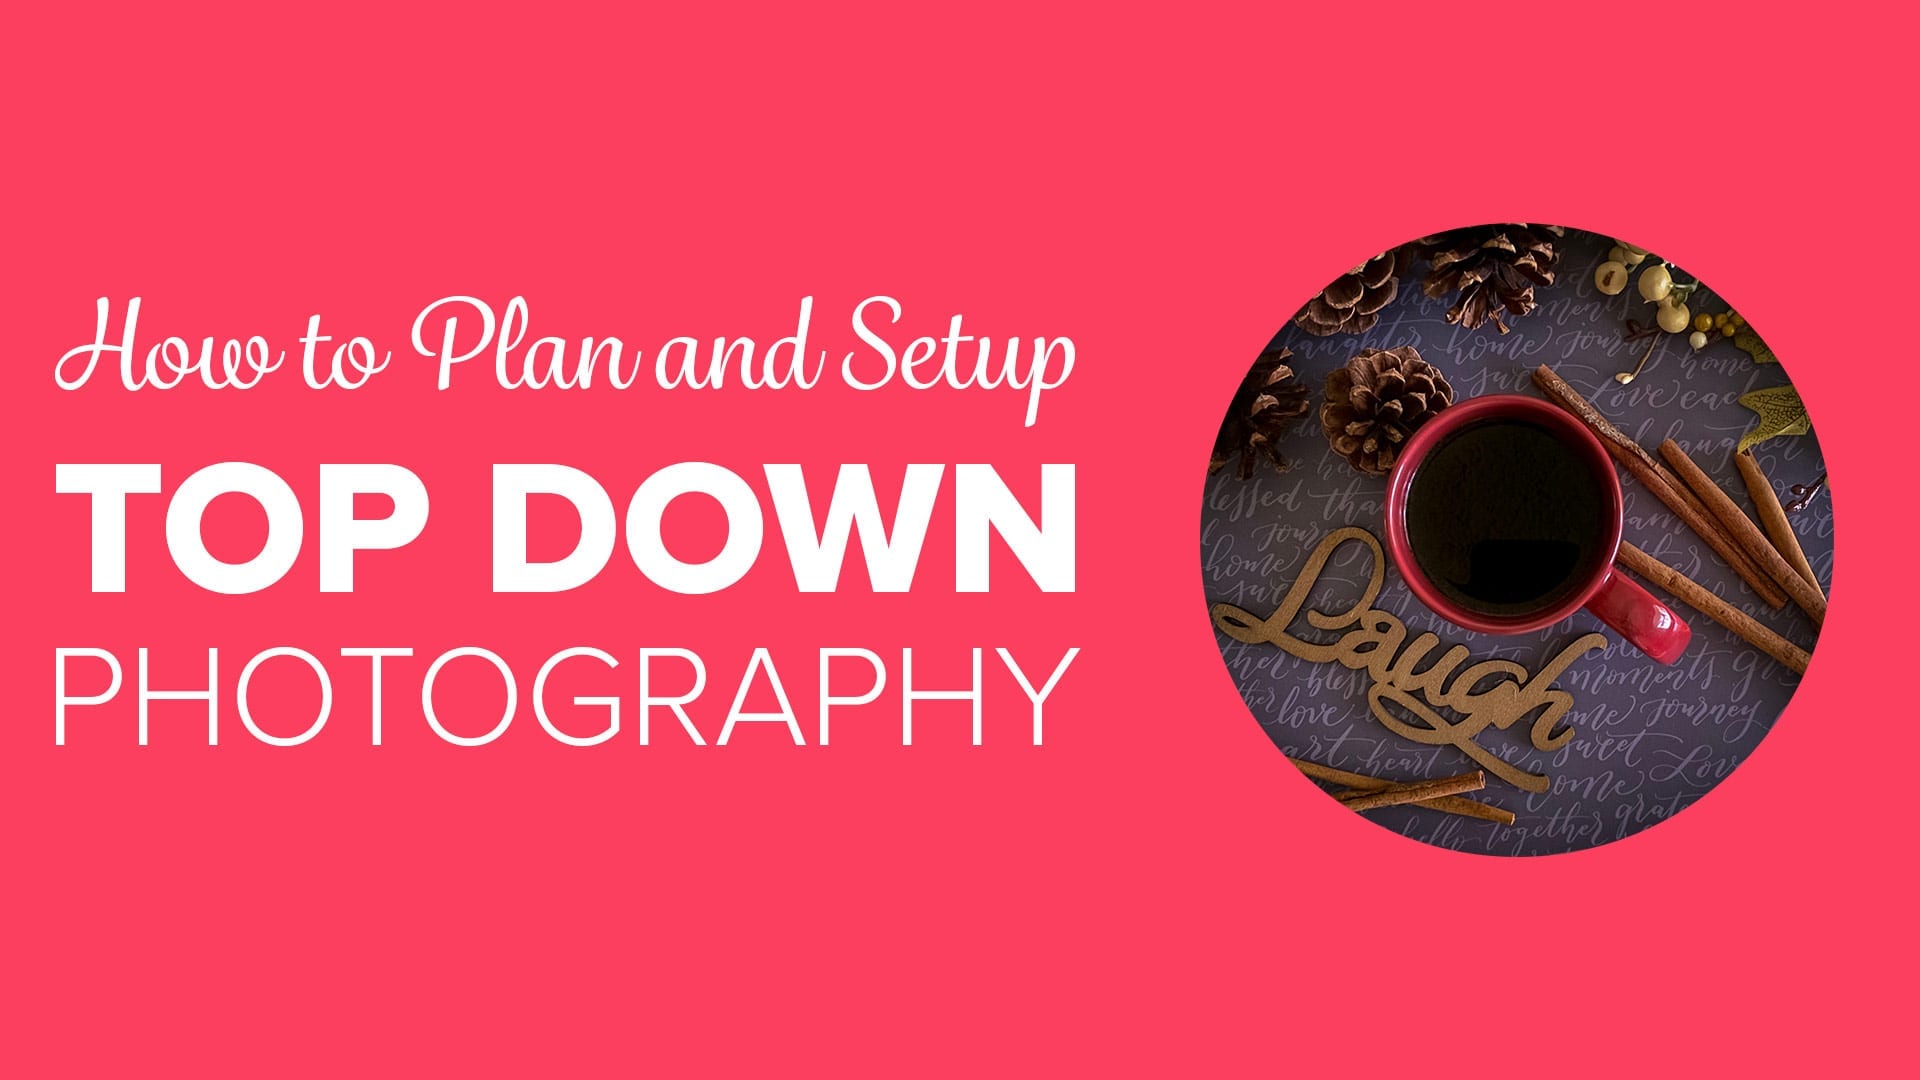 Top-Down Photos: How to Plan and Setup